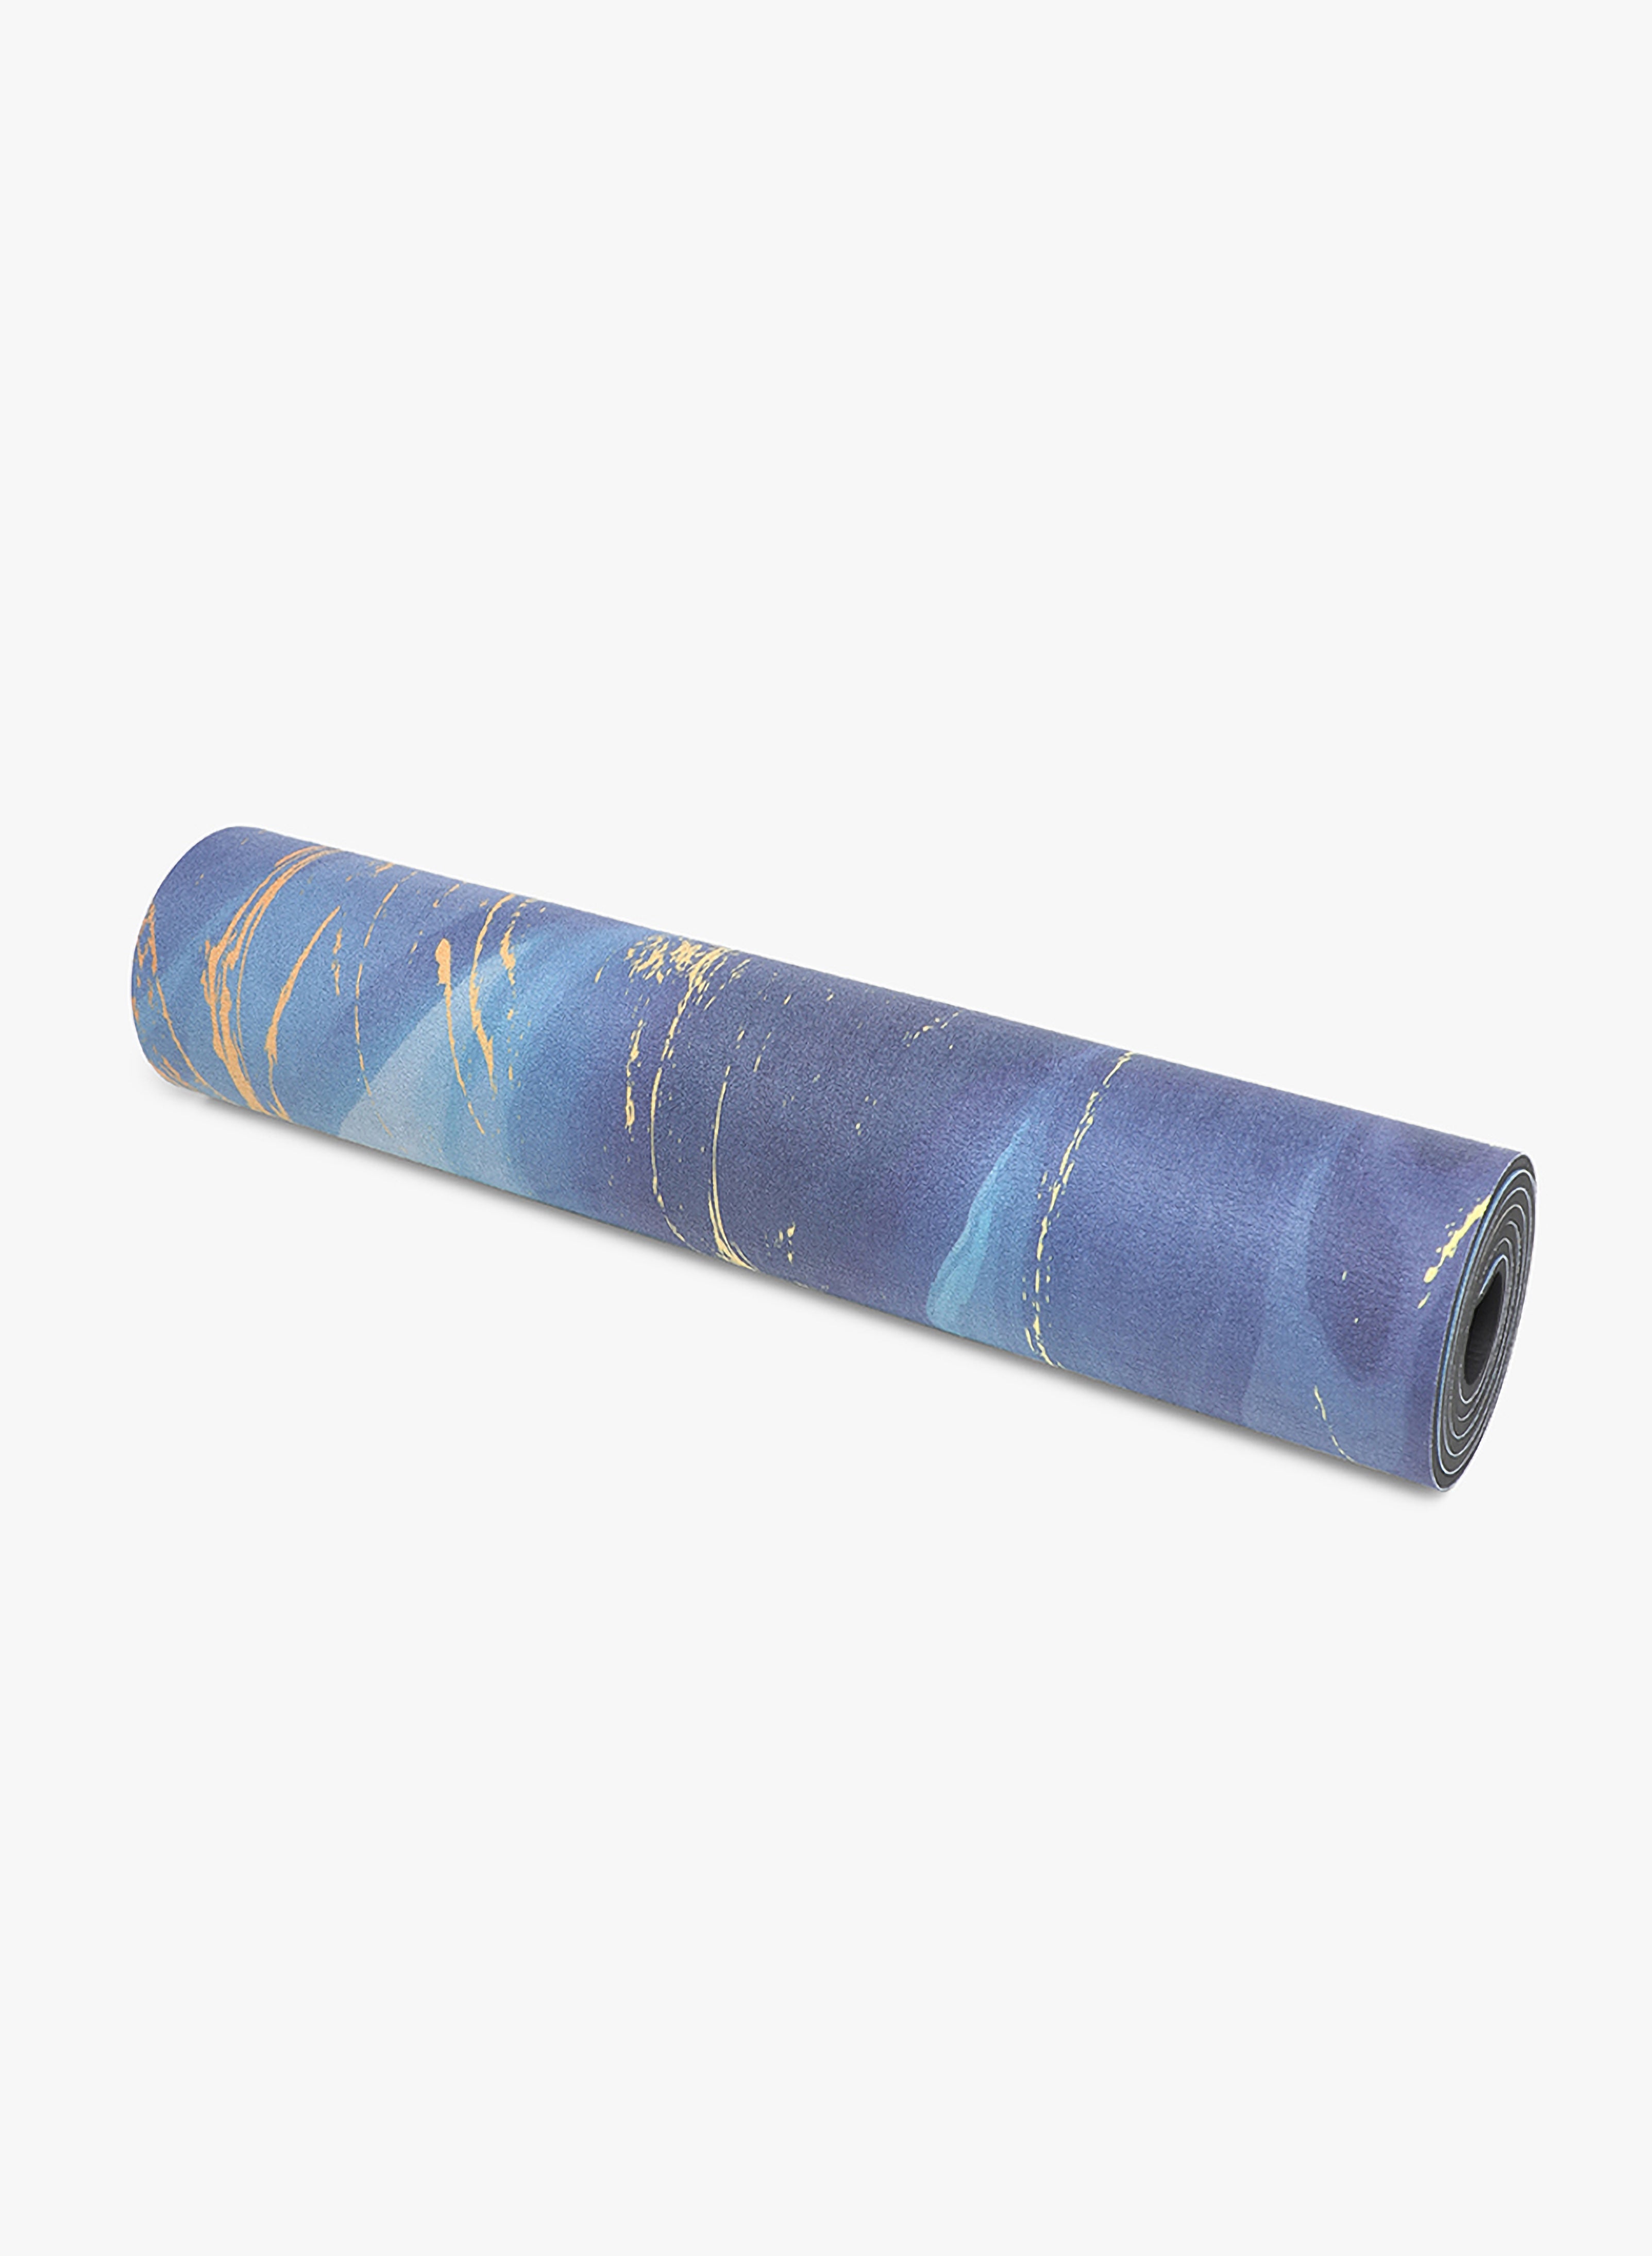 Shakti Warrior Ajna Chakra TPE Yoga Mat - Experience the tranquil energy of the ocean-inspired design. Connect with your intuition and elevate your practice on this eco-friendly mat.